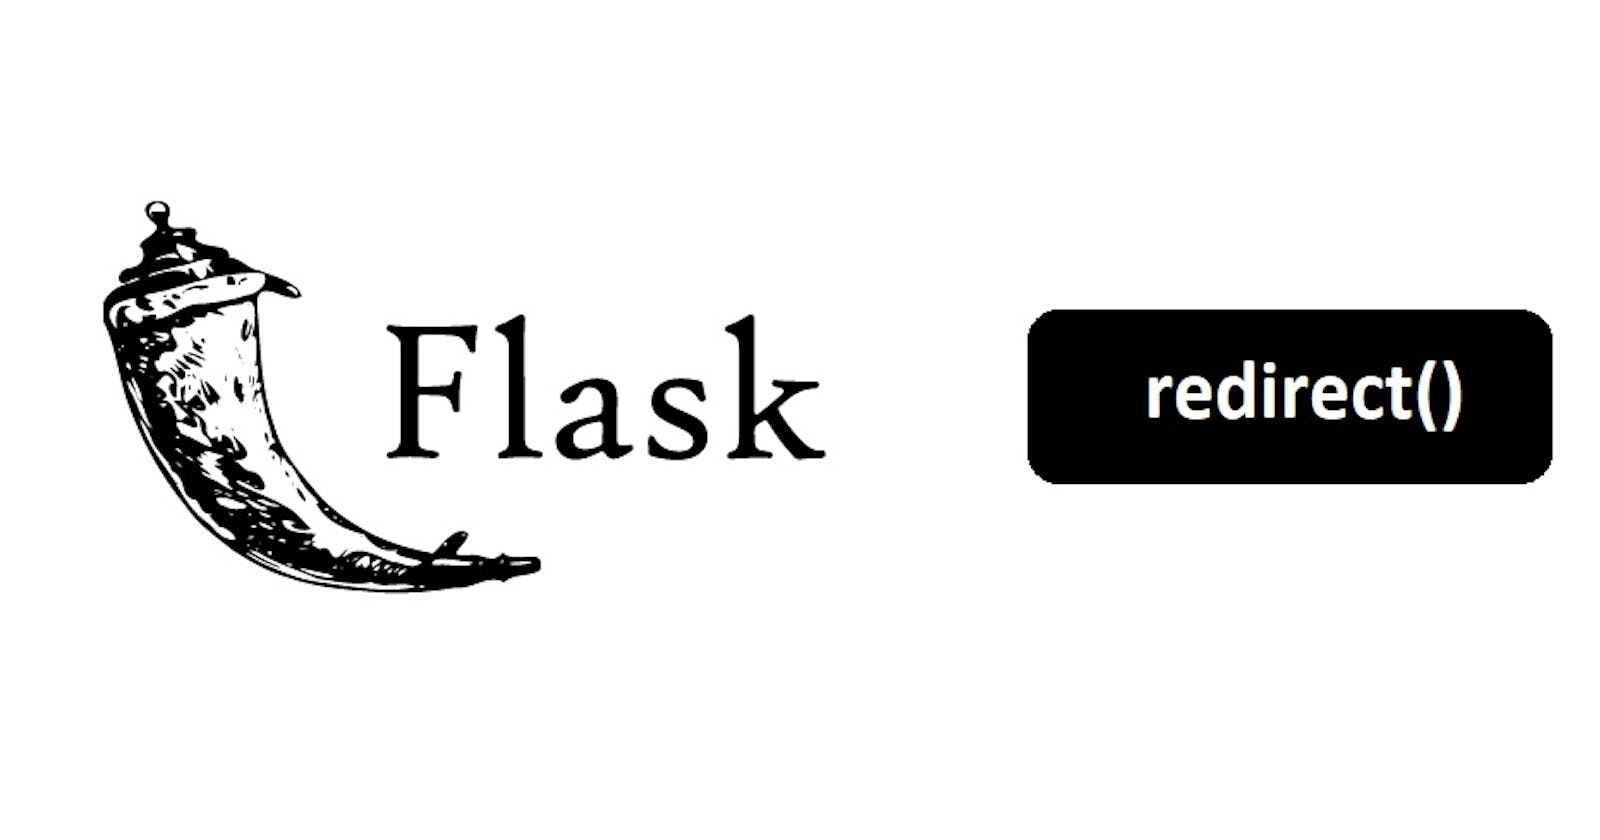 HTTP redirect explained using FLASK